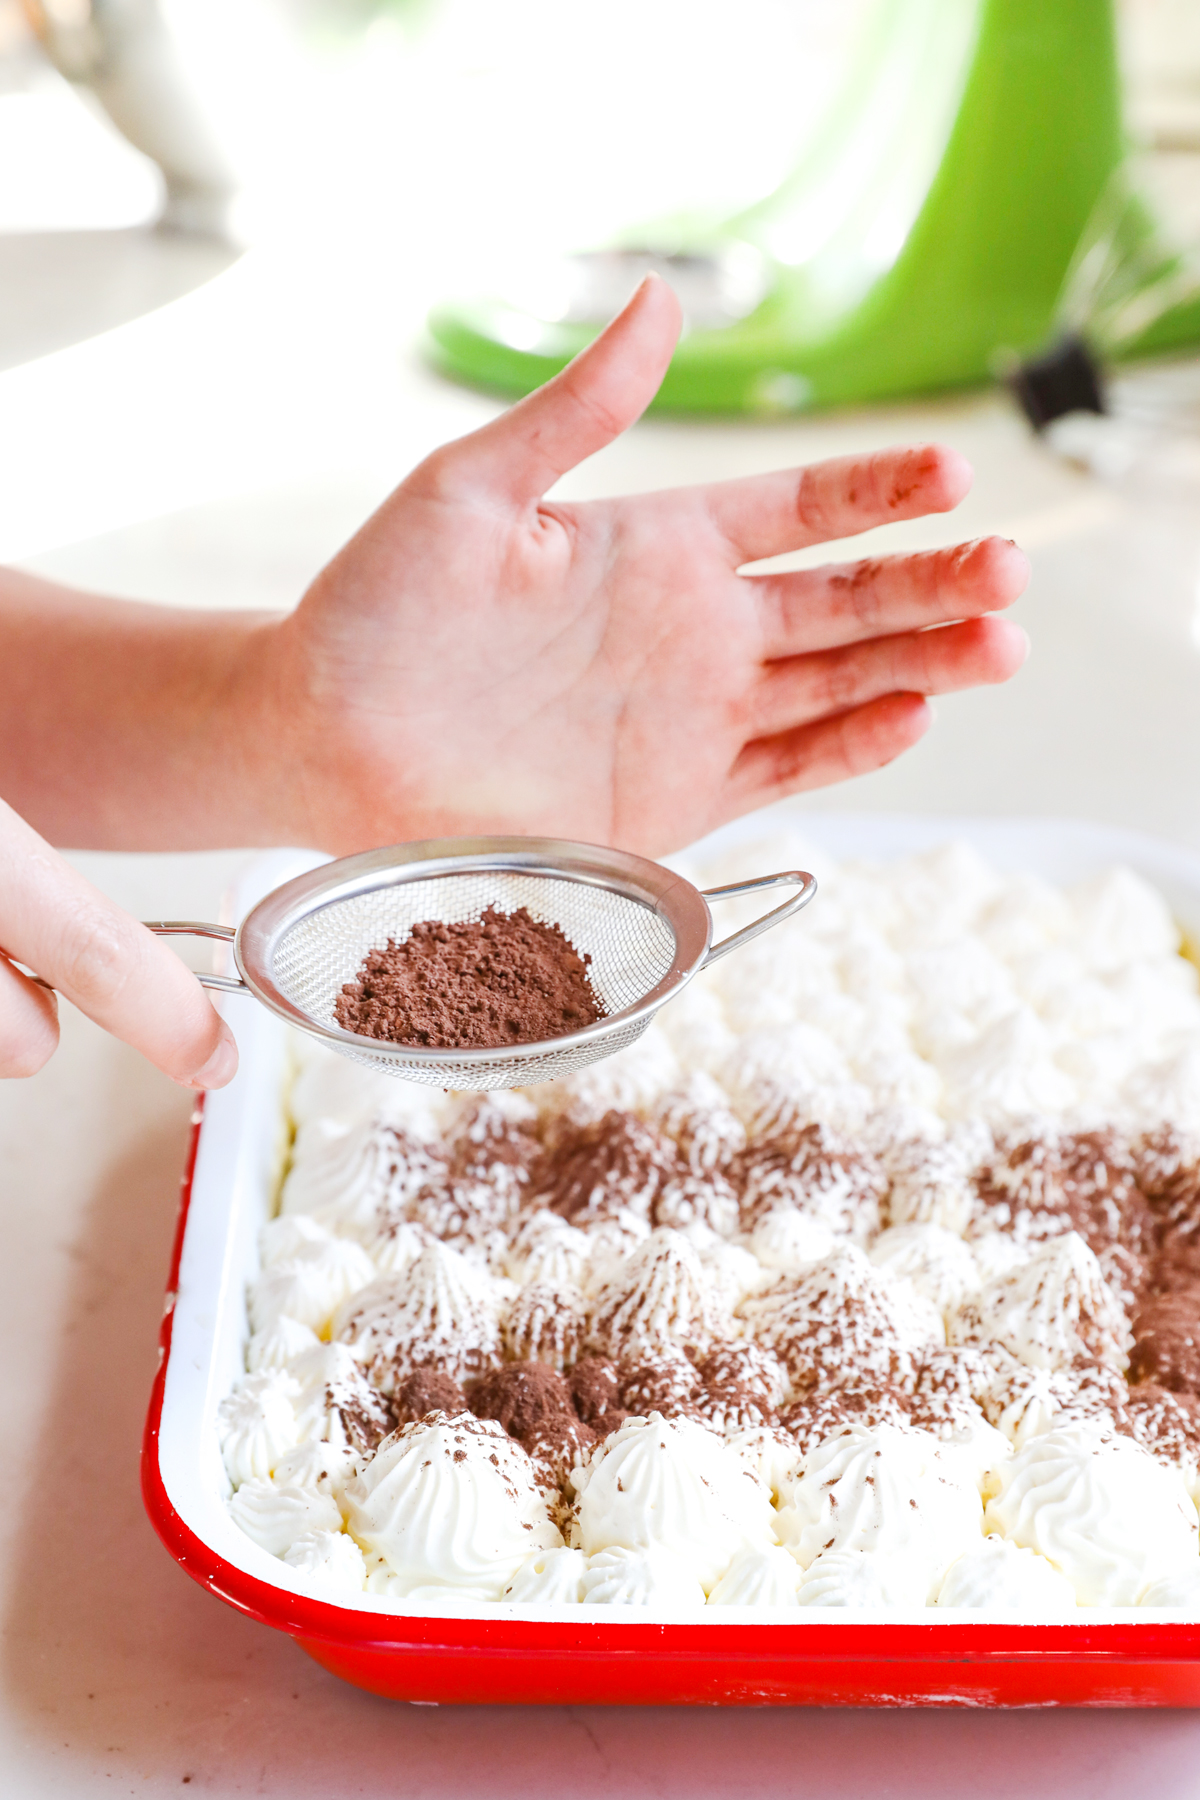 Dusting cream with icing sugar and cocoa powder mix